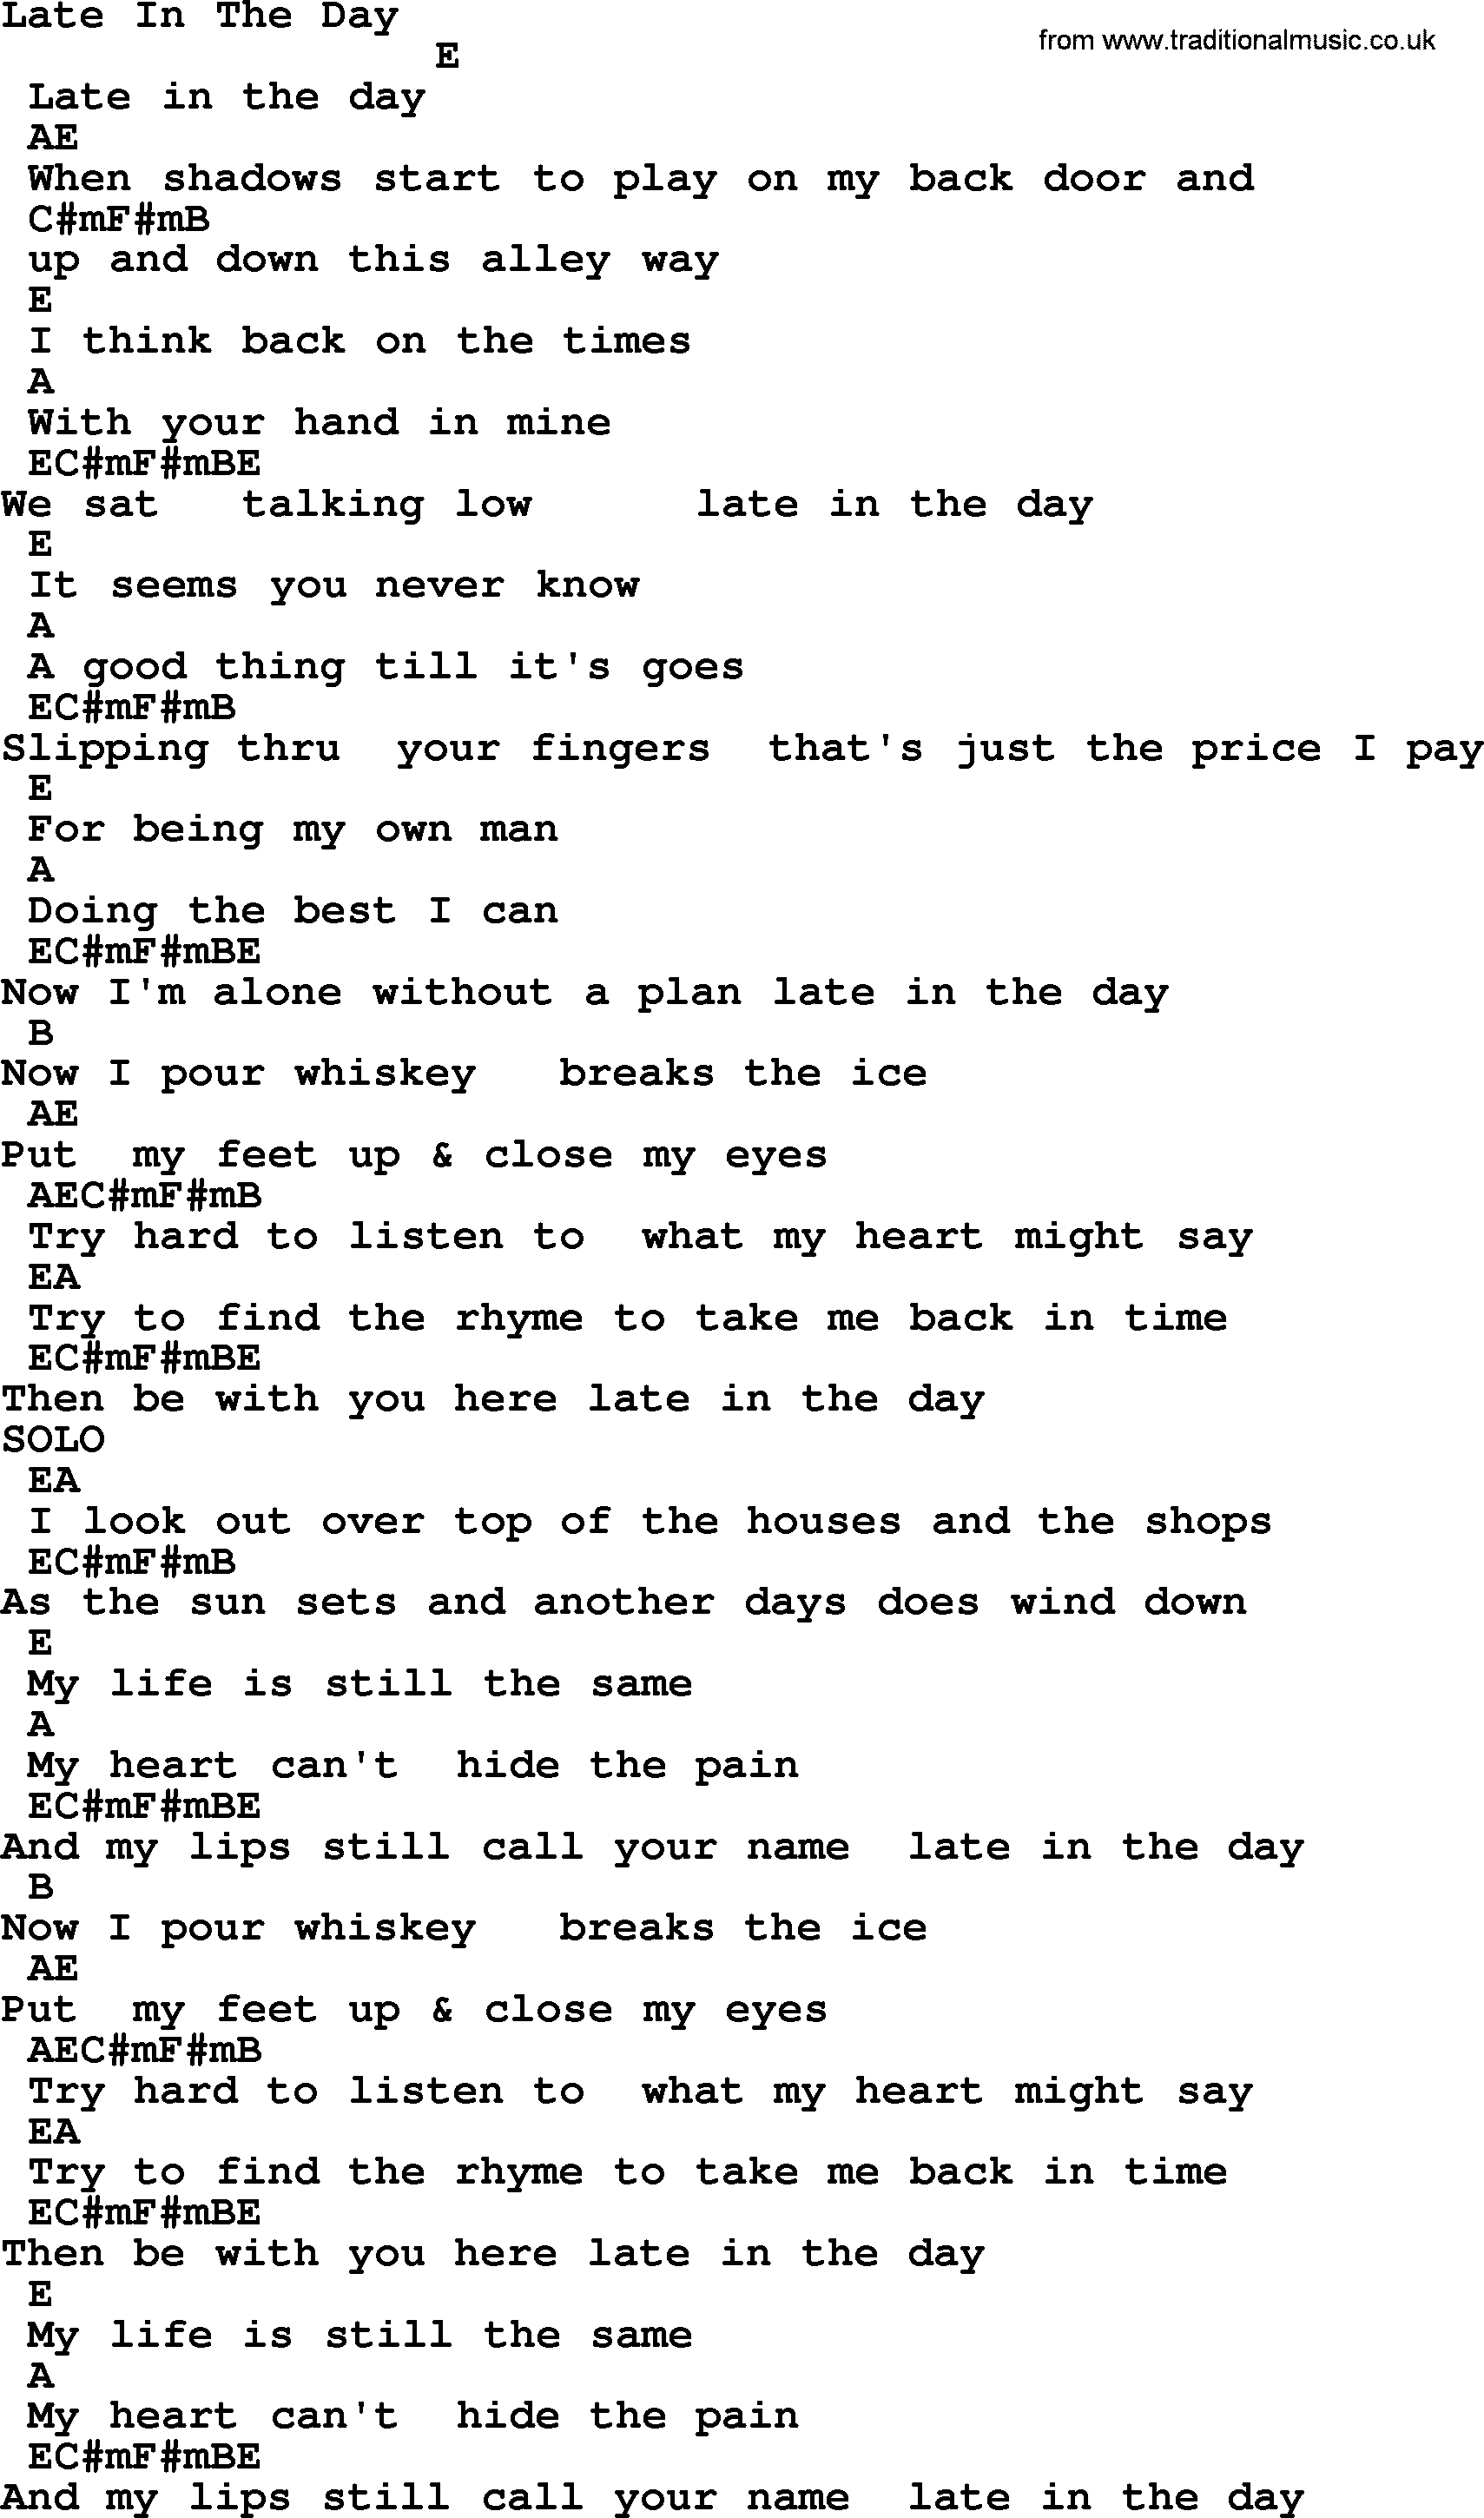 Bluegrass song: Late In The Day, lyrics and chords